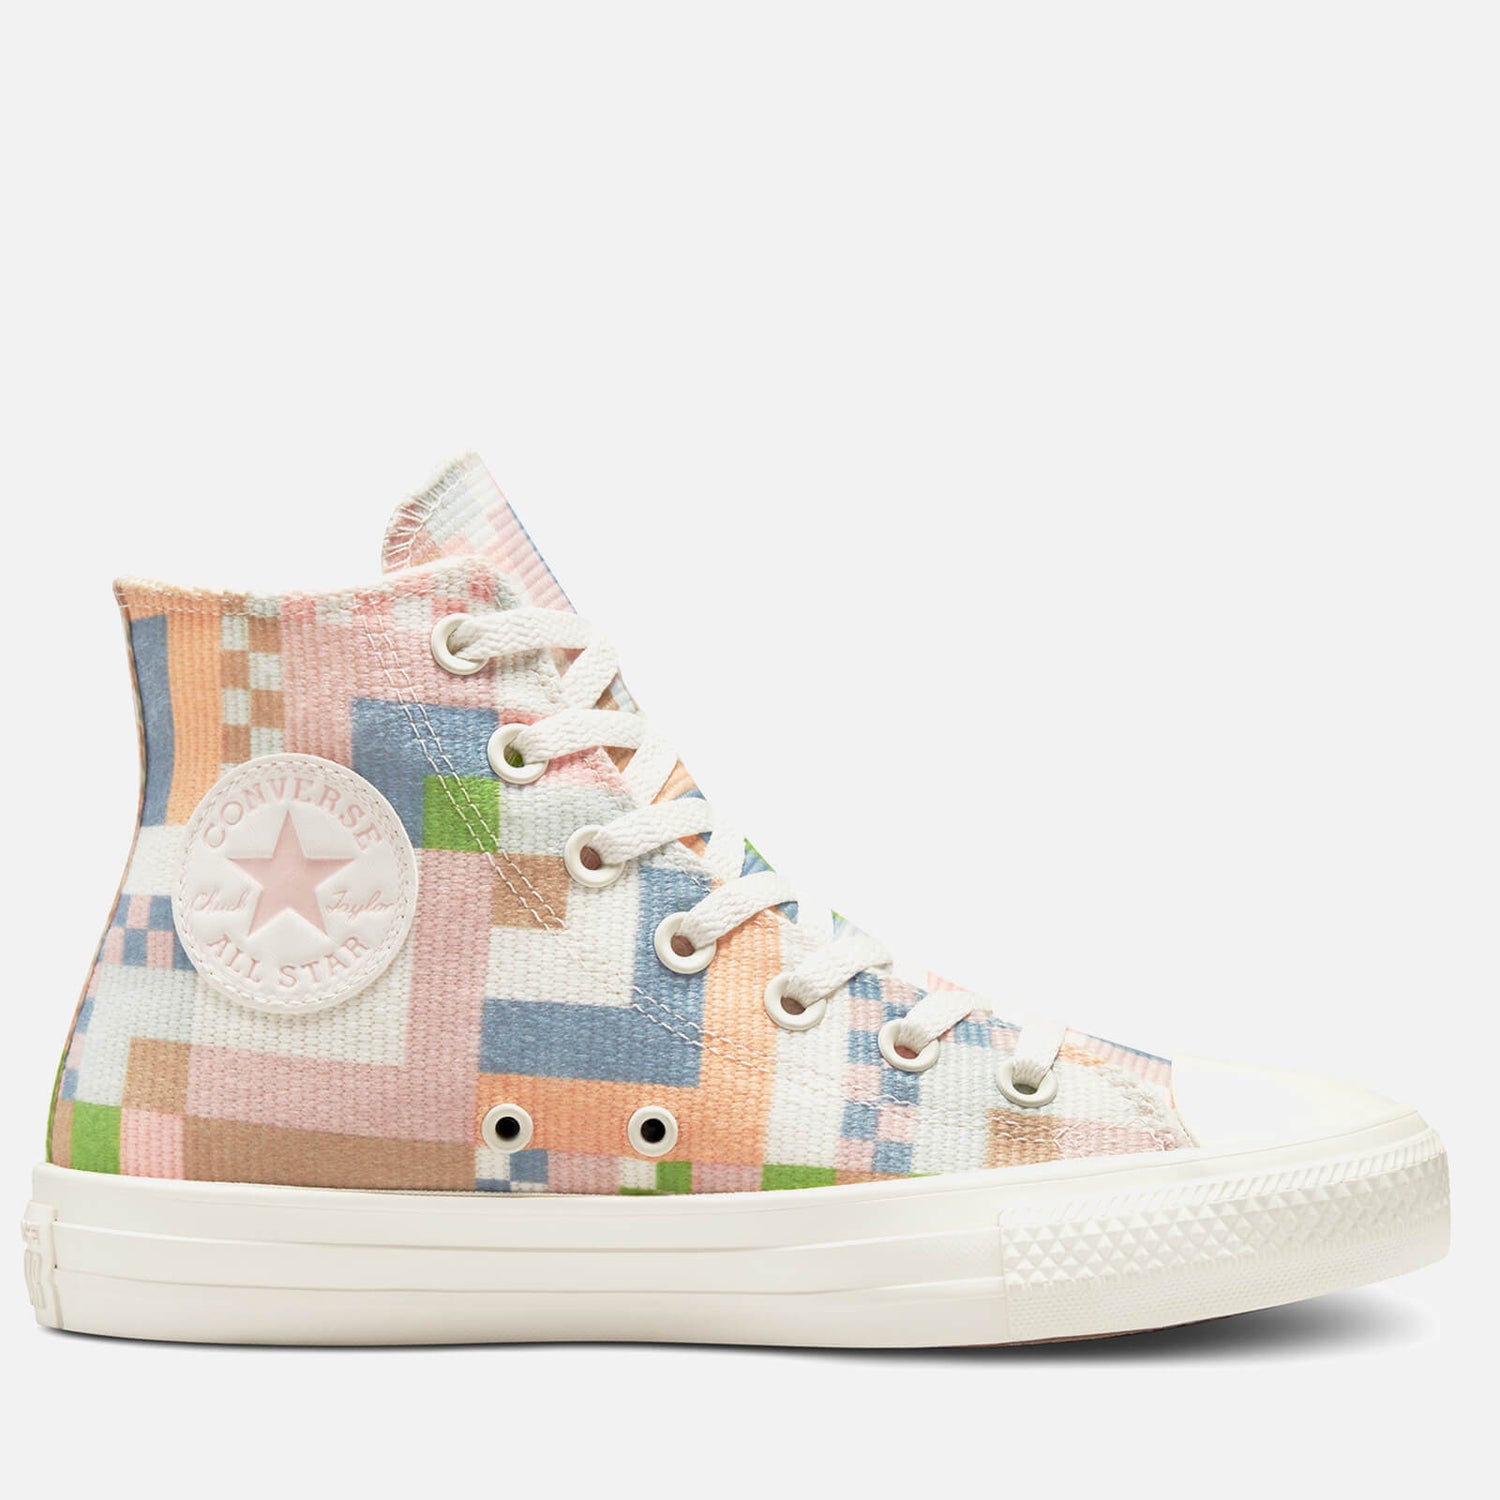 Converse Women's Chuck Taylor All Star Crafted Stripes Hi-Top Trainers - Egret/Pink Clay/Indigo Oxide